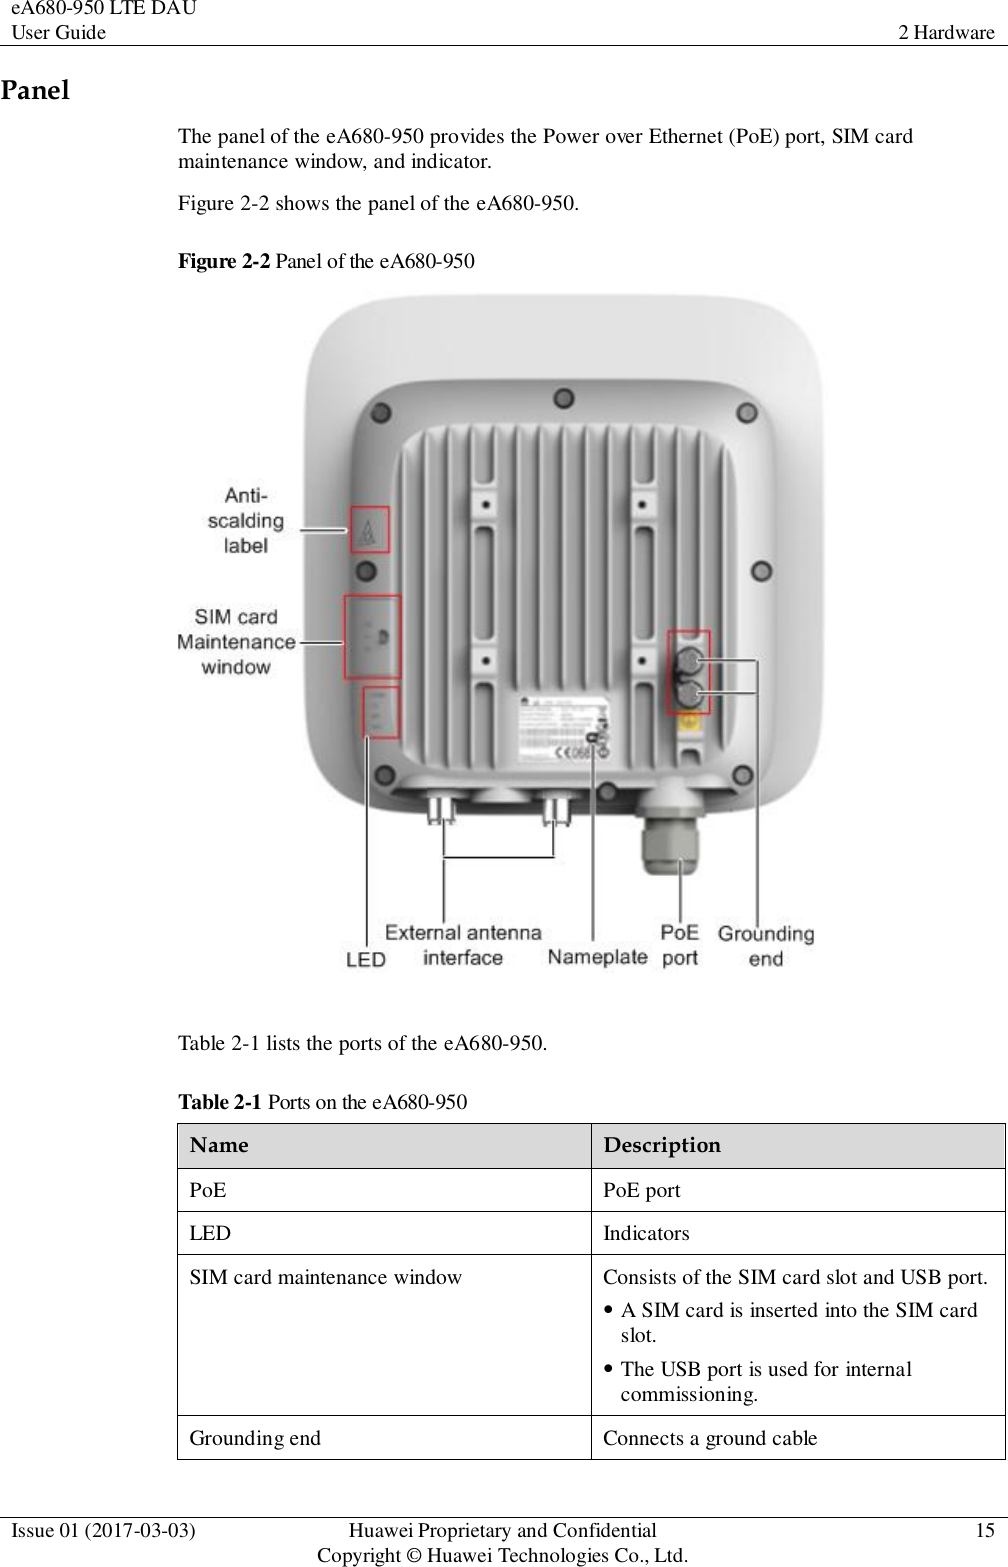 eA680-950 LTE DAU User Guide 2 Hardware  Issue 01 (2017-03-03) Huawei Proprietary and Confidential                                     Copyright © Huawei Technologies Co., Ltd. 15  Panel The panel of the eA680-950 provides the Power over Ethernet (PoE) port, SIM card maintenance window, and indicator. Figure 2-2 shows the panel of the eA680-950. Figure 2-2 Panel of the eA680-950   Table 2-1 lists the ports of the eA680-950. Table 2-1 Ports on the eA680-950 Name Description PoE PoE port LED Indicators SIM card maintenance window Consists of the SIM card slot and USB port.  A SIM card is inserted into the SIM card slot.  The USB port is used for internal commissioning. Grounding end Connects a ground cable 